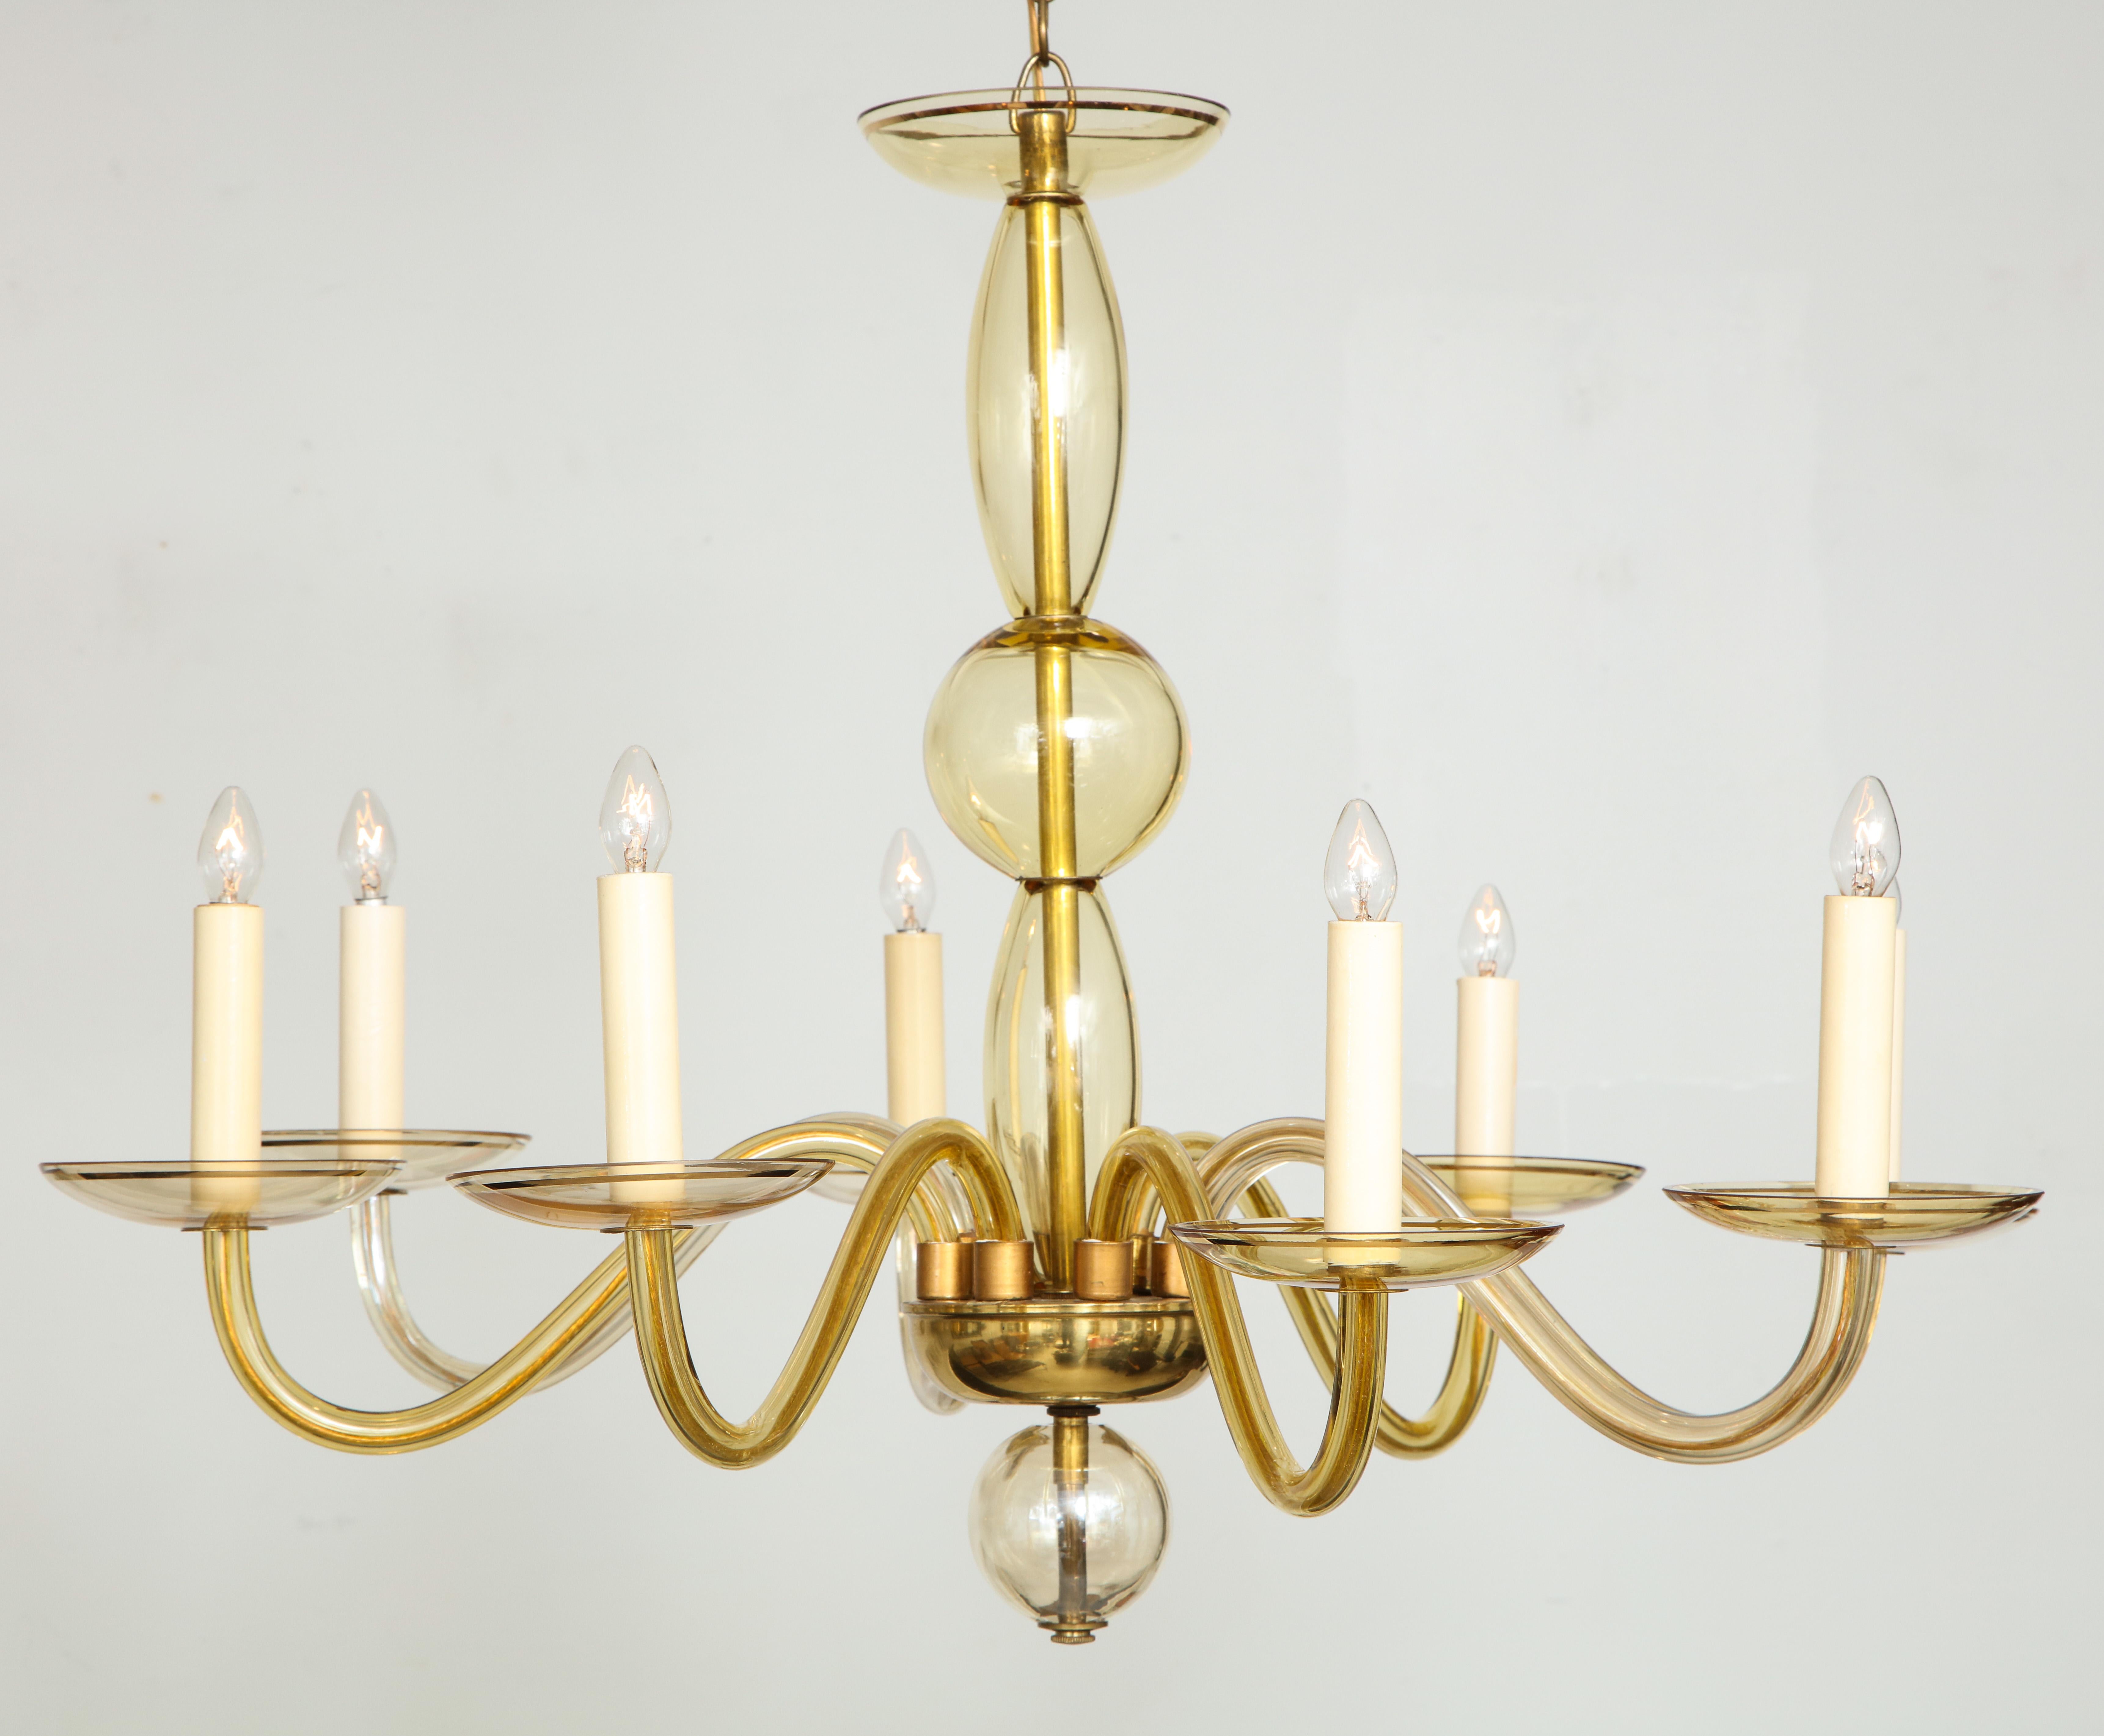 Eight- arms amber-colored Murano glass chandelier.